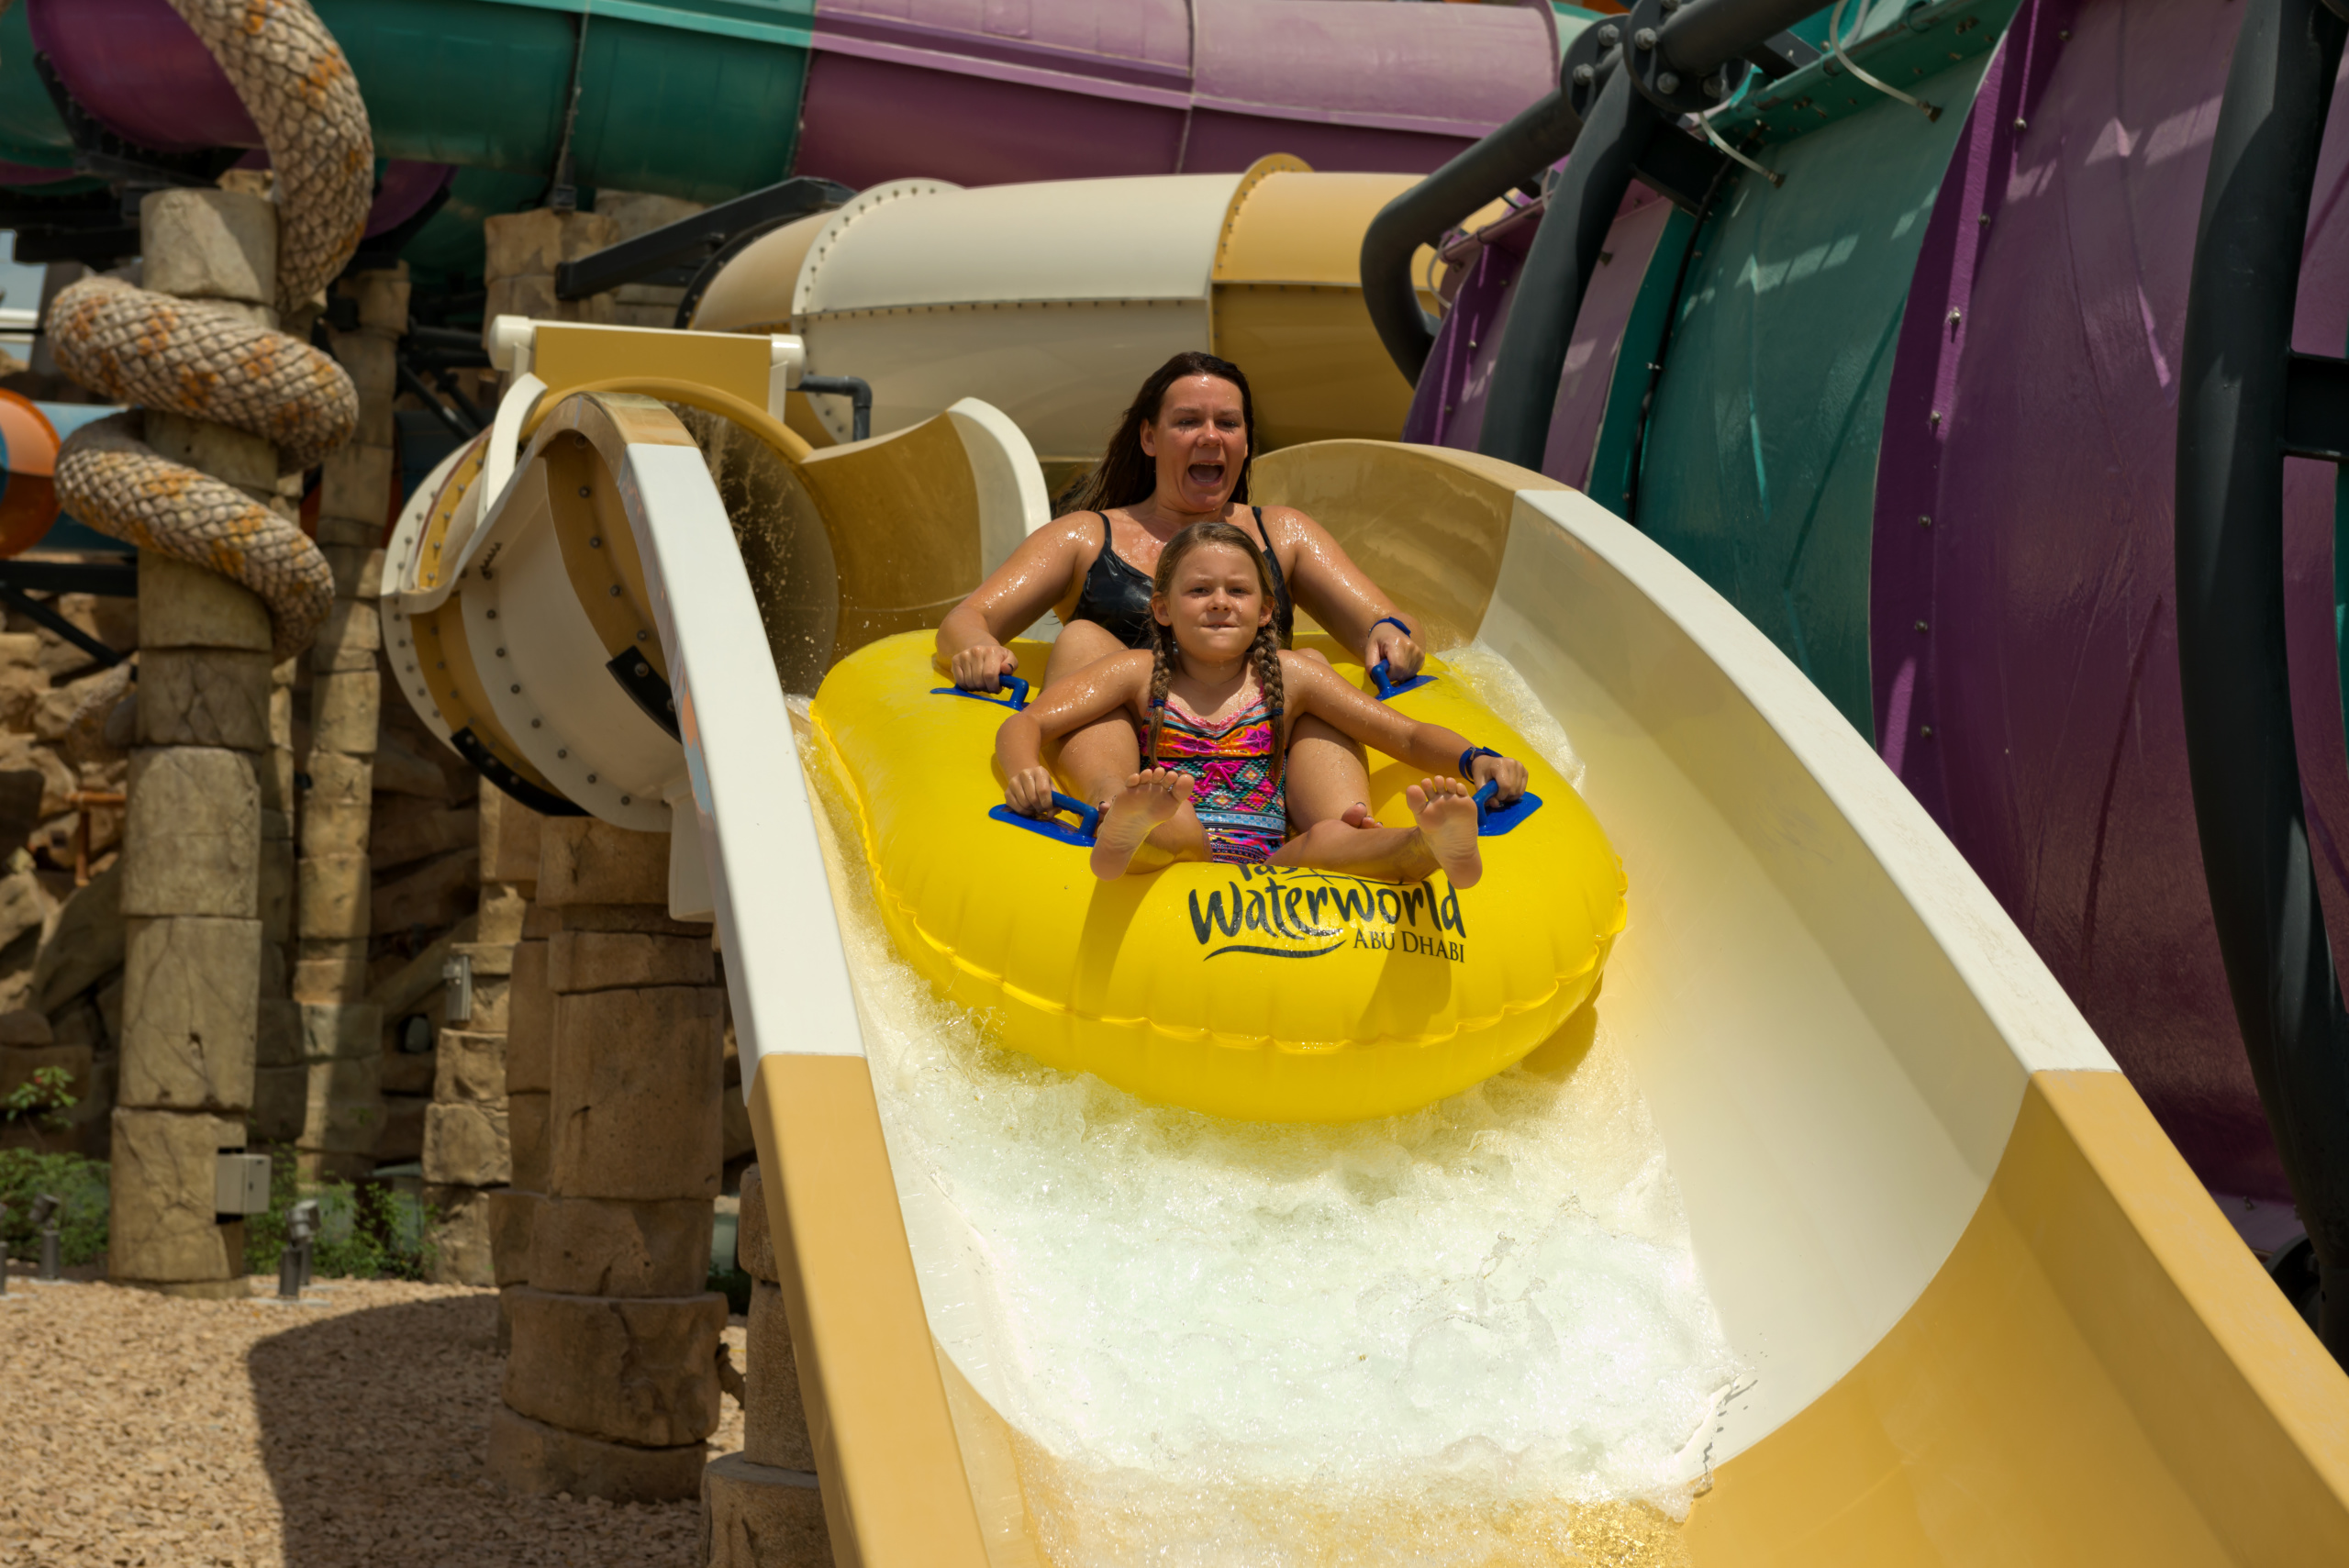 woman and girl on inner tube going down yellow water slide